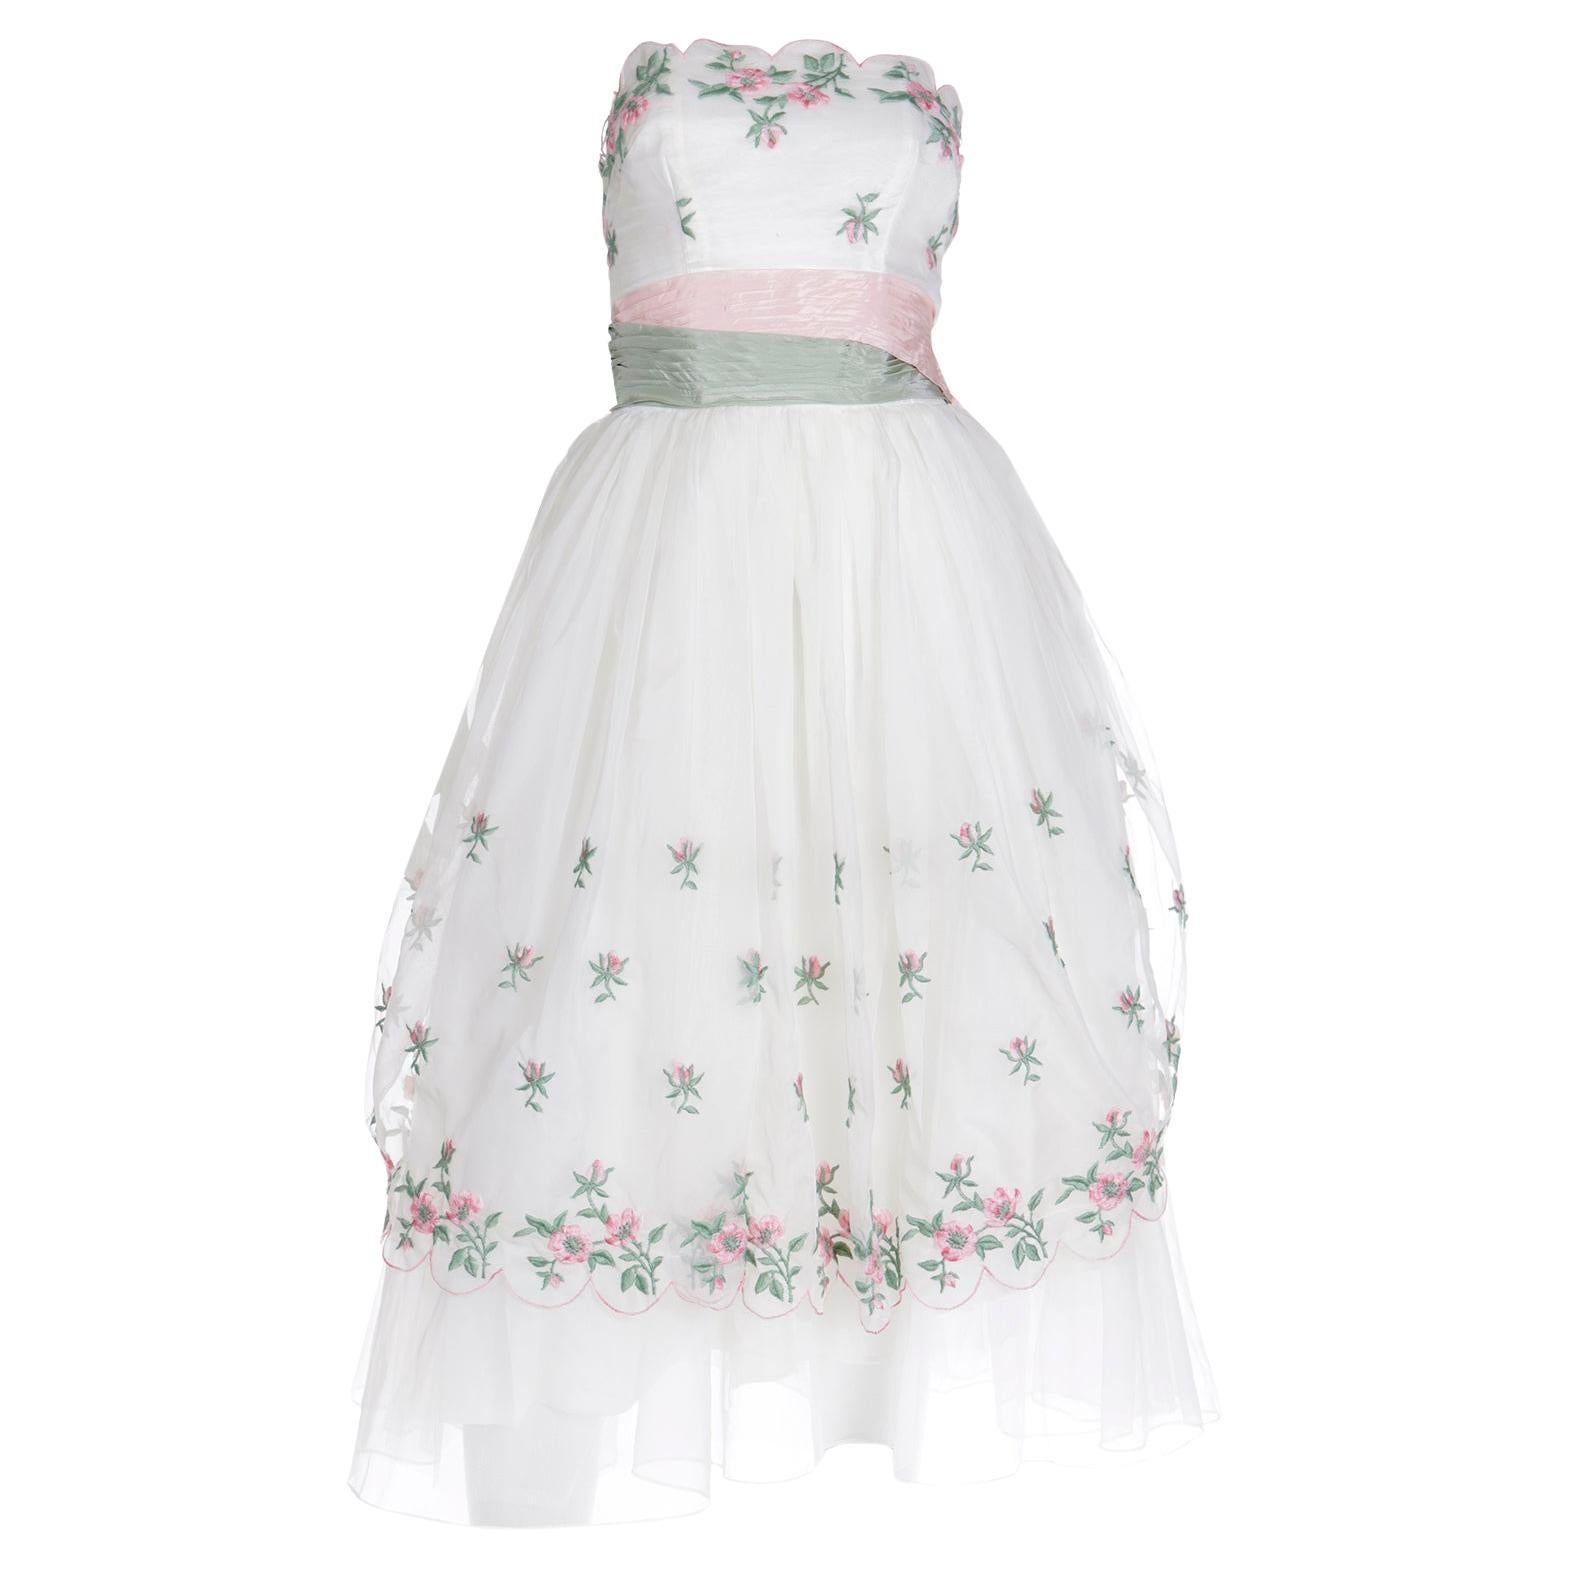 Emma Domb 1950's White Party Dress w Pink and Green Embroidered Flowers For Sale